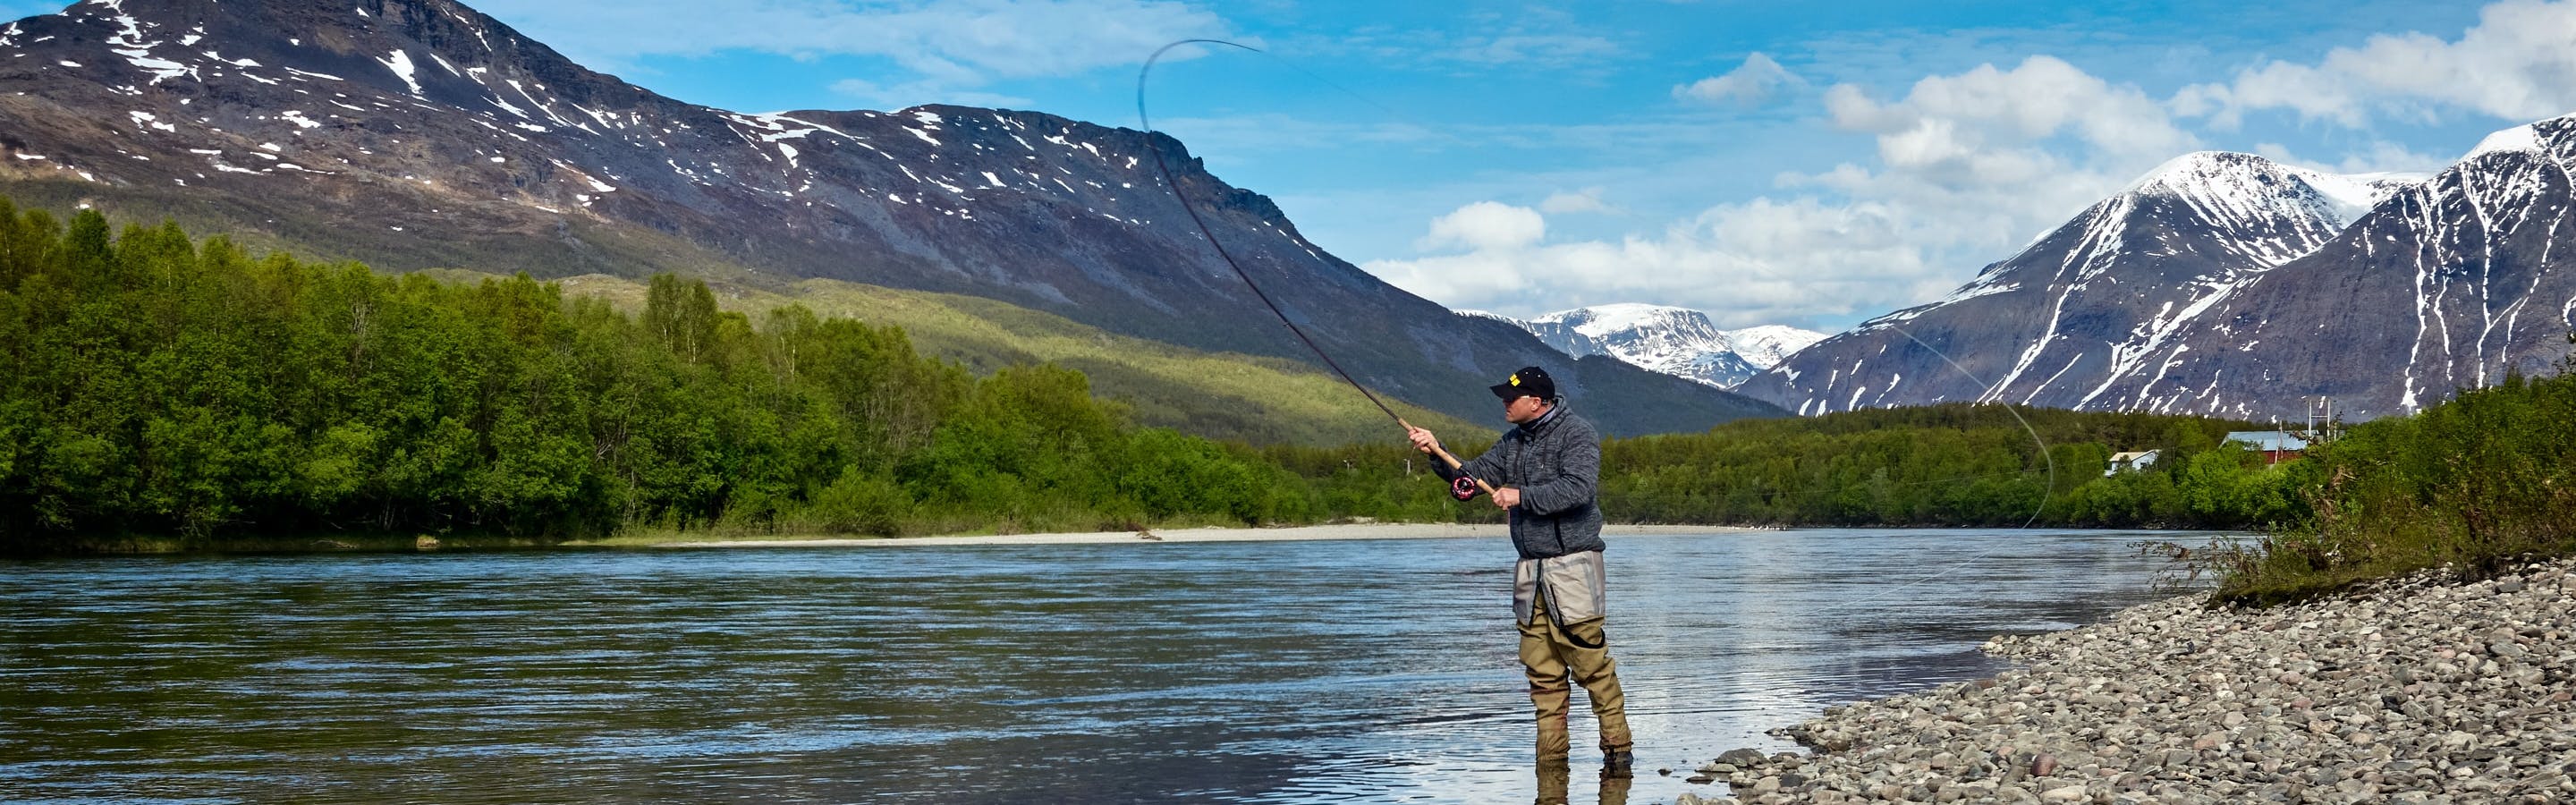 A man stands on the shore of a river and casts a fly line